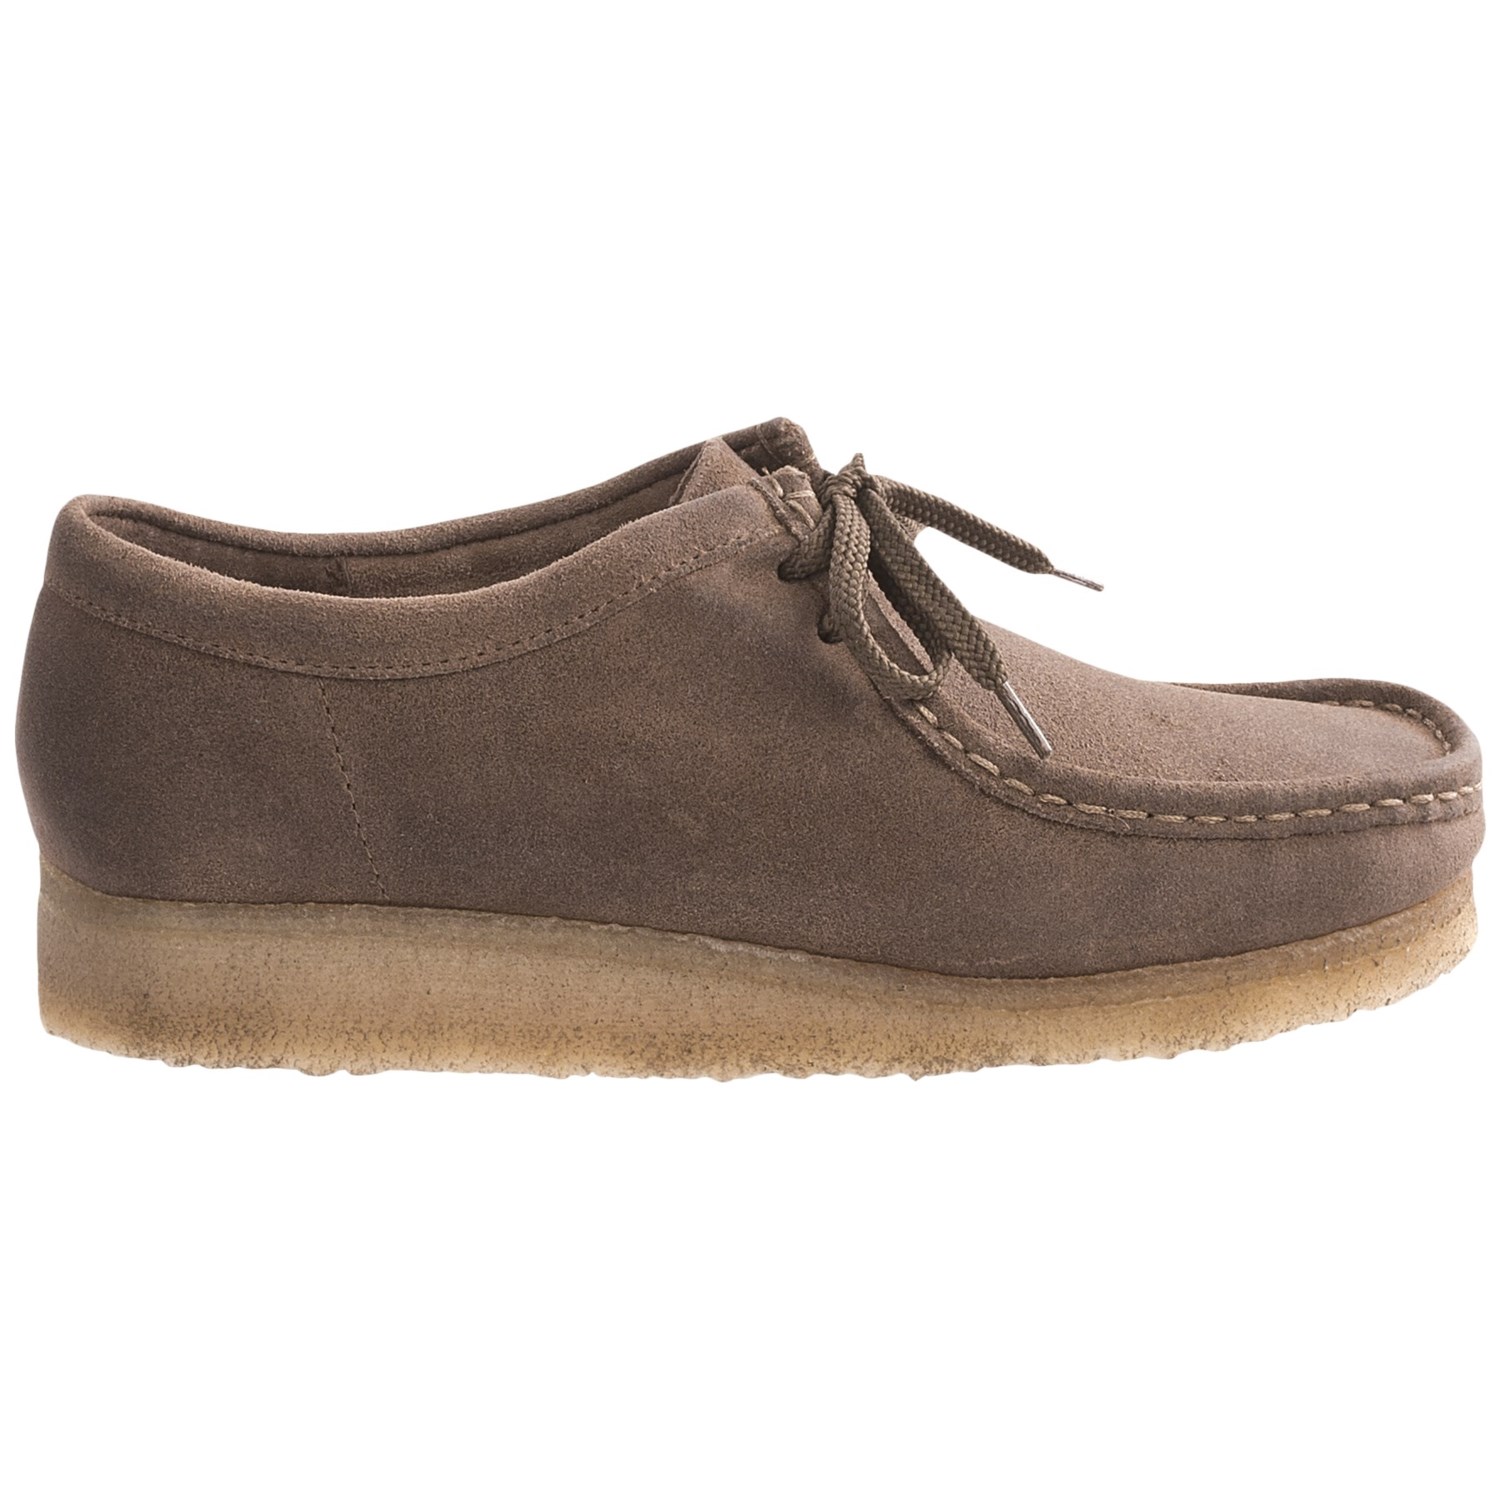 Clarks Wallabee Shoes (For Men) 7058T - Save 40%